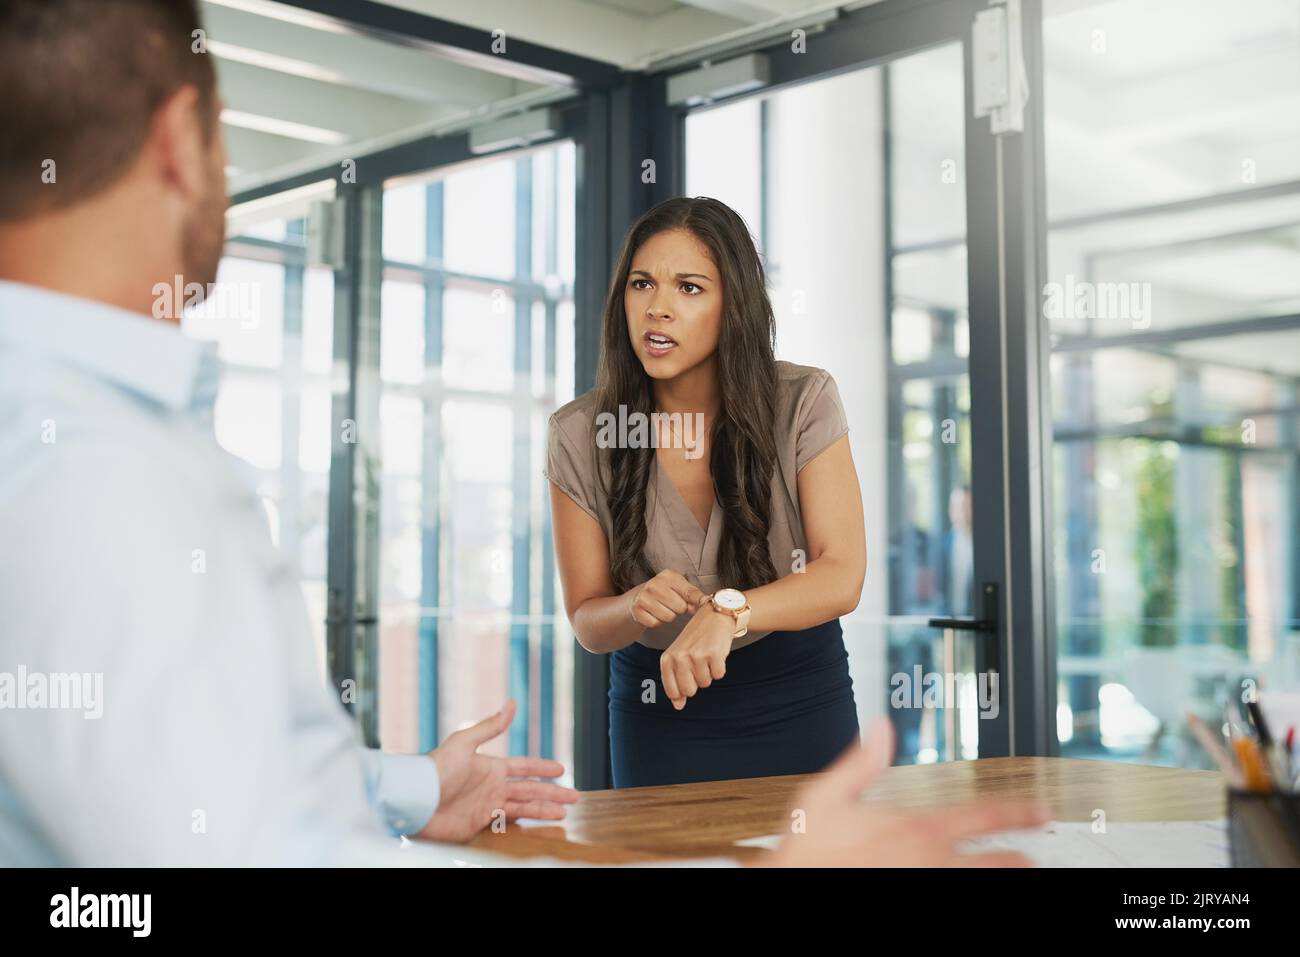 Do you even know what time it is. an angry businesswoman scolding her colleague for being late in the office. Stock Photo